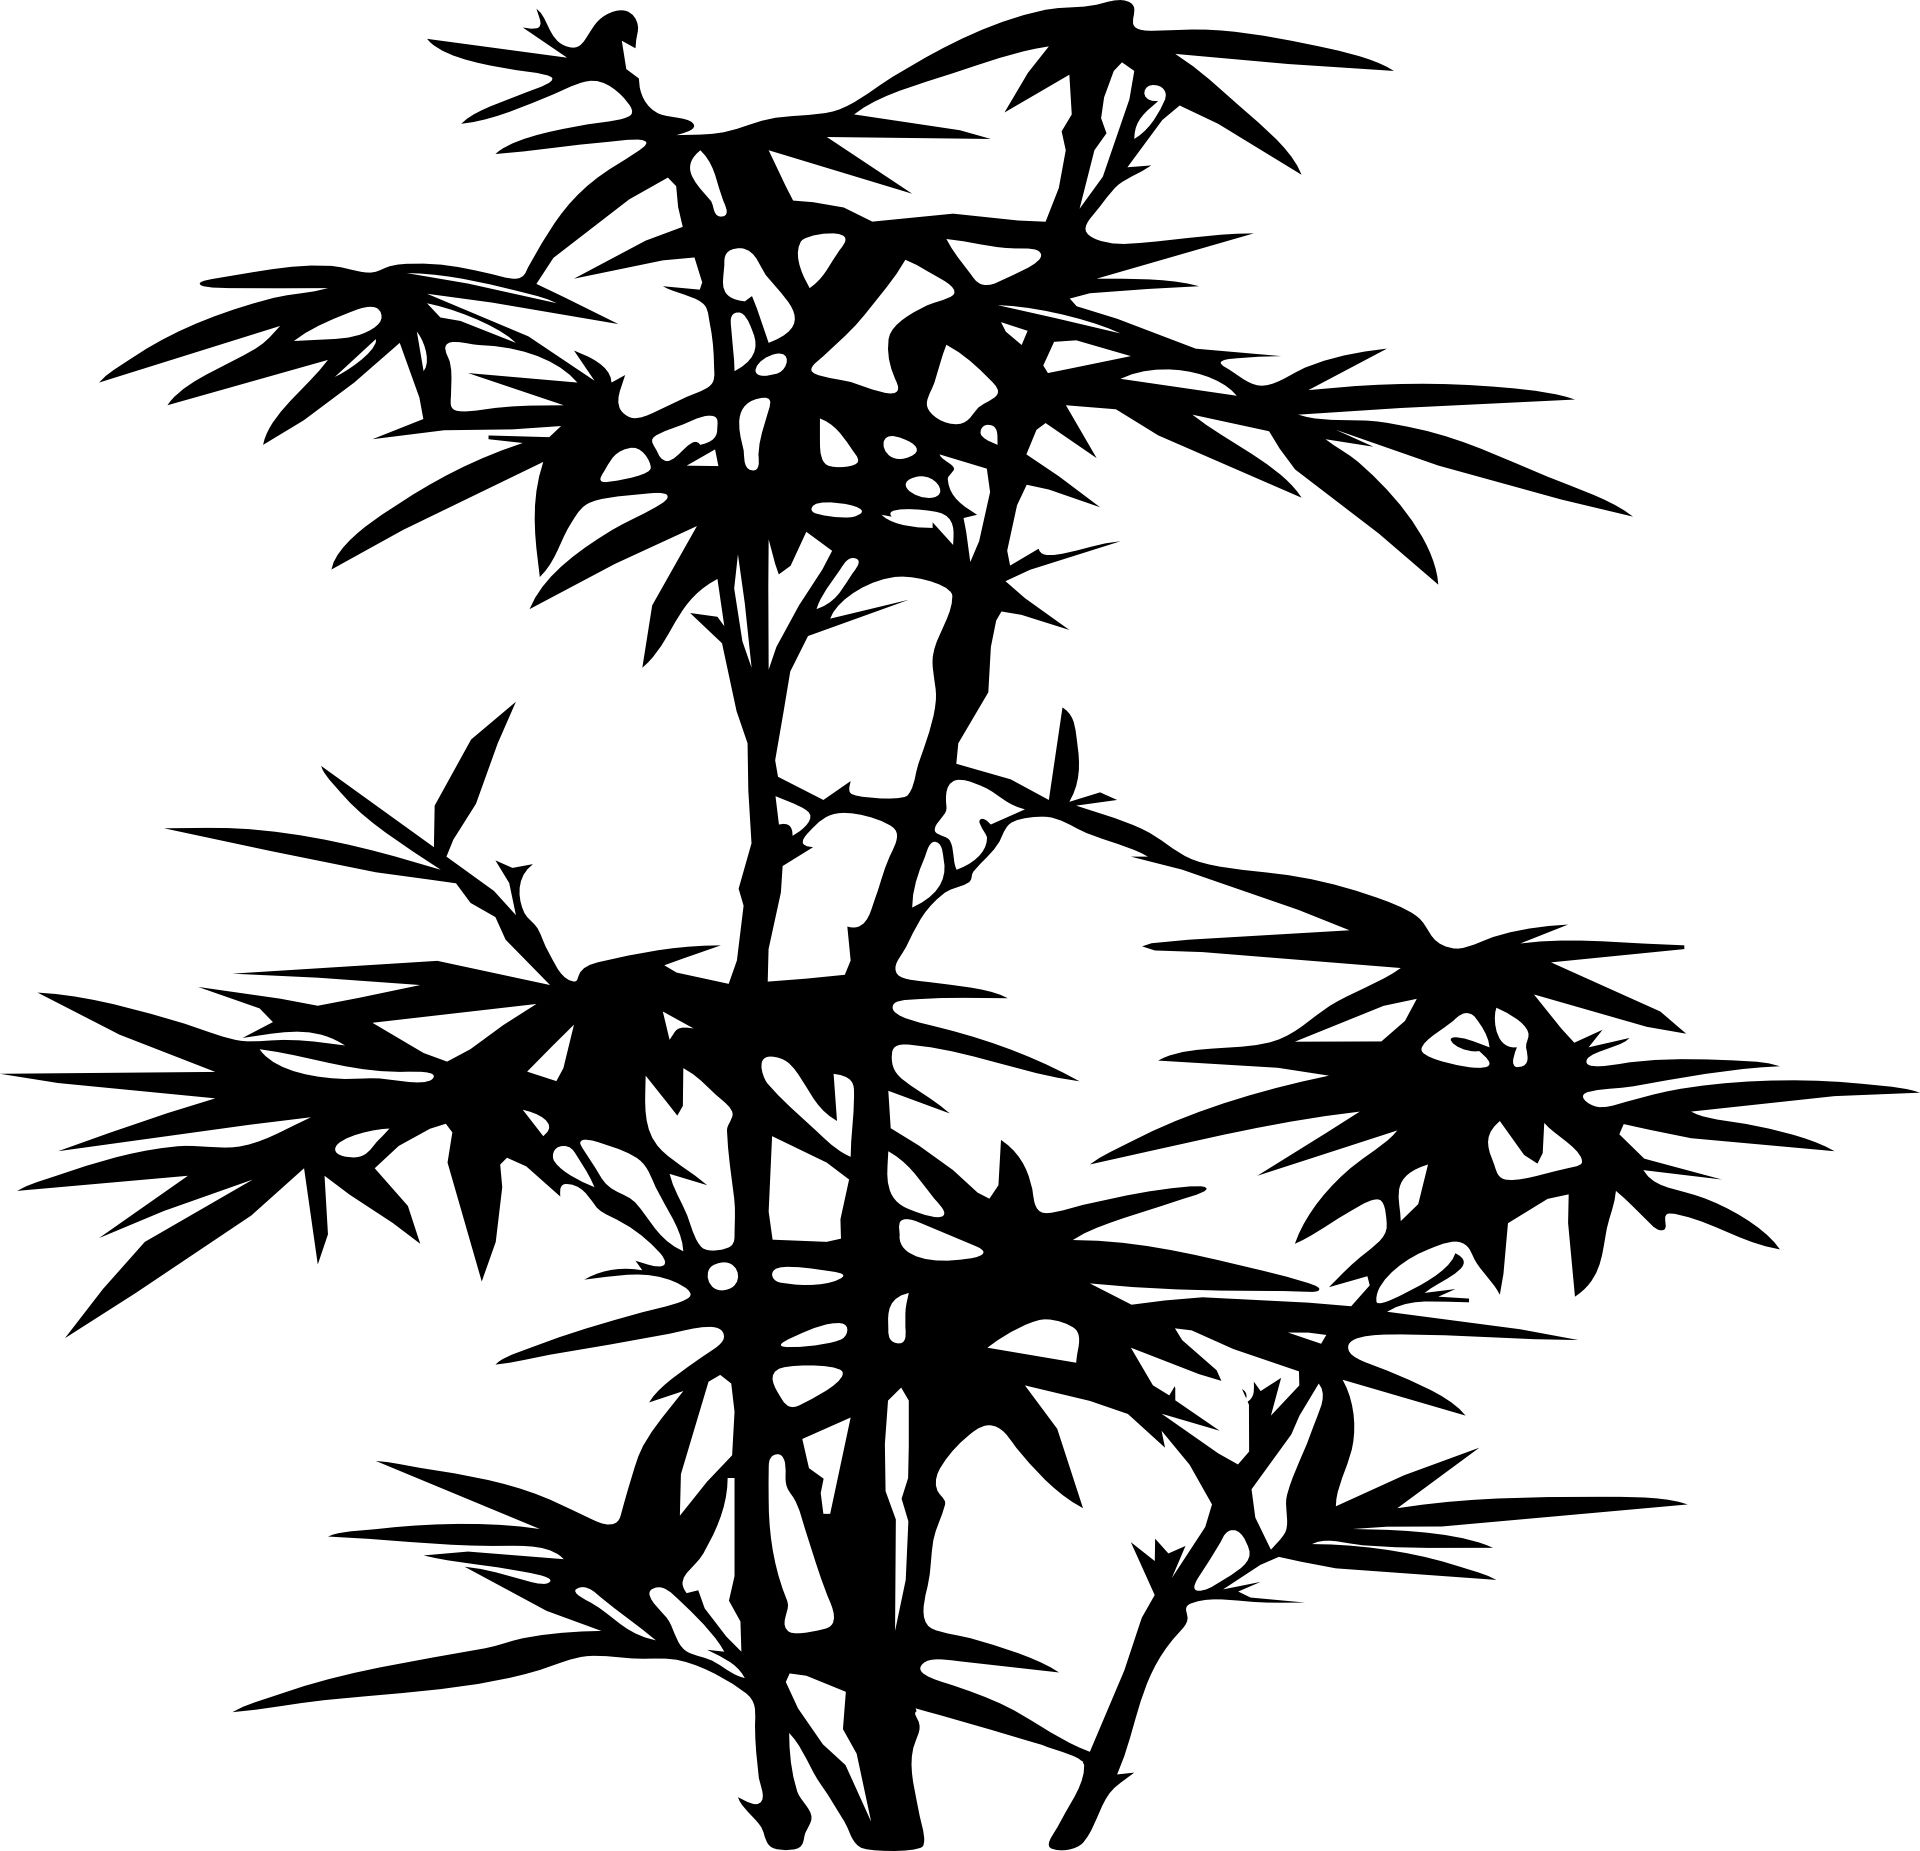 bamboo clipart silhouette